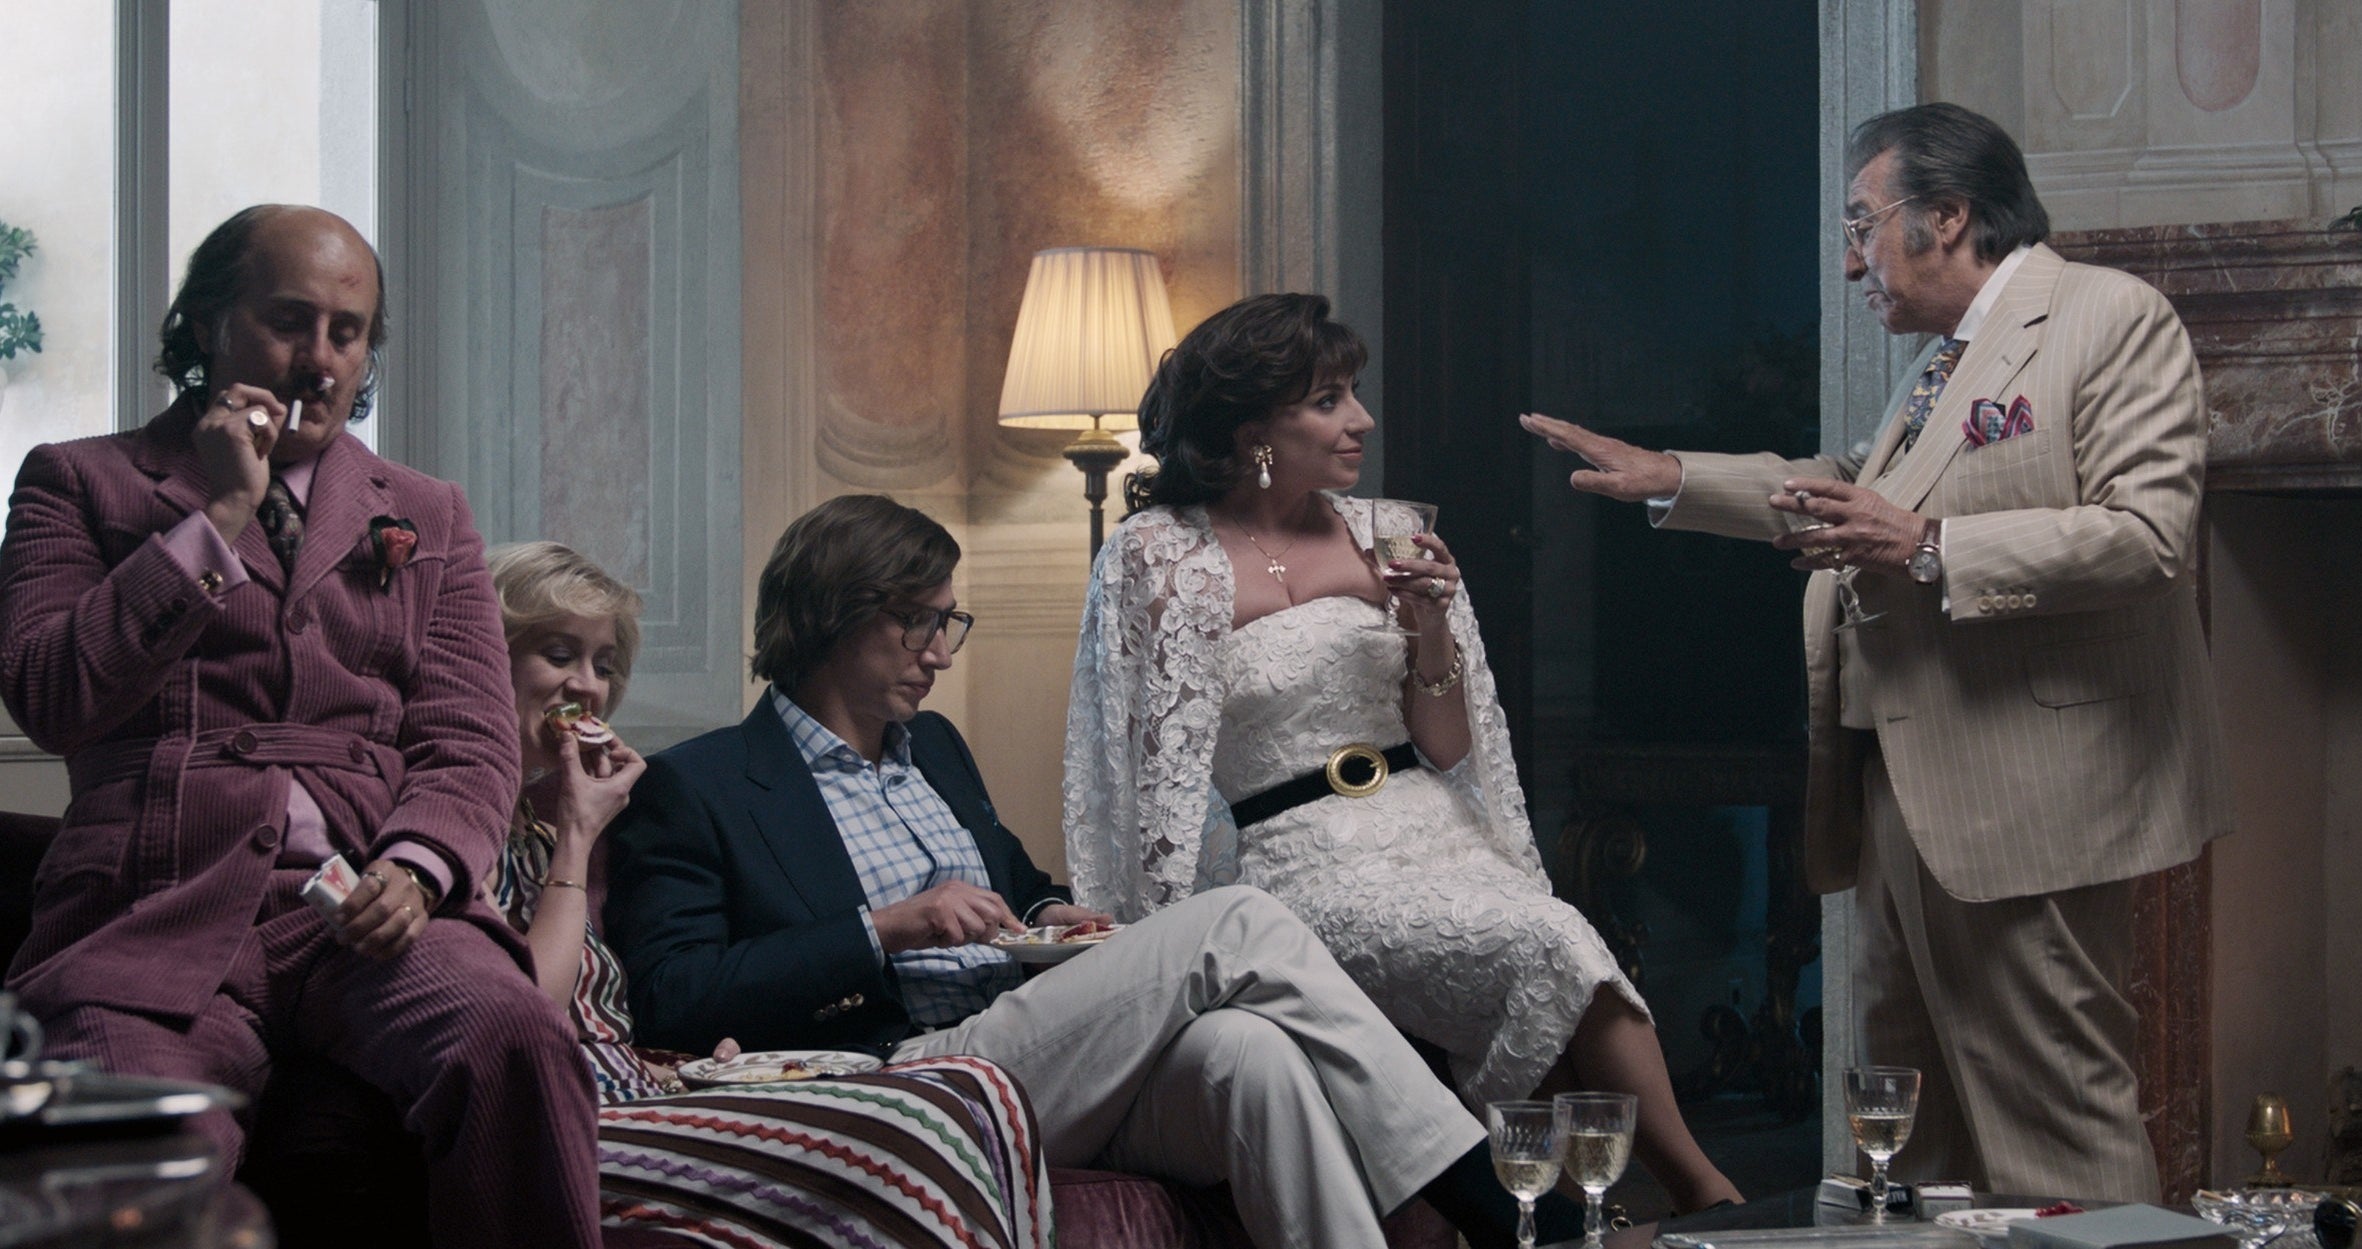 The Gucci family sits on a couch together in the film